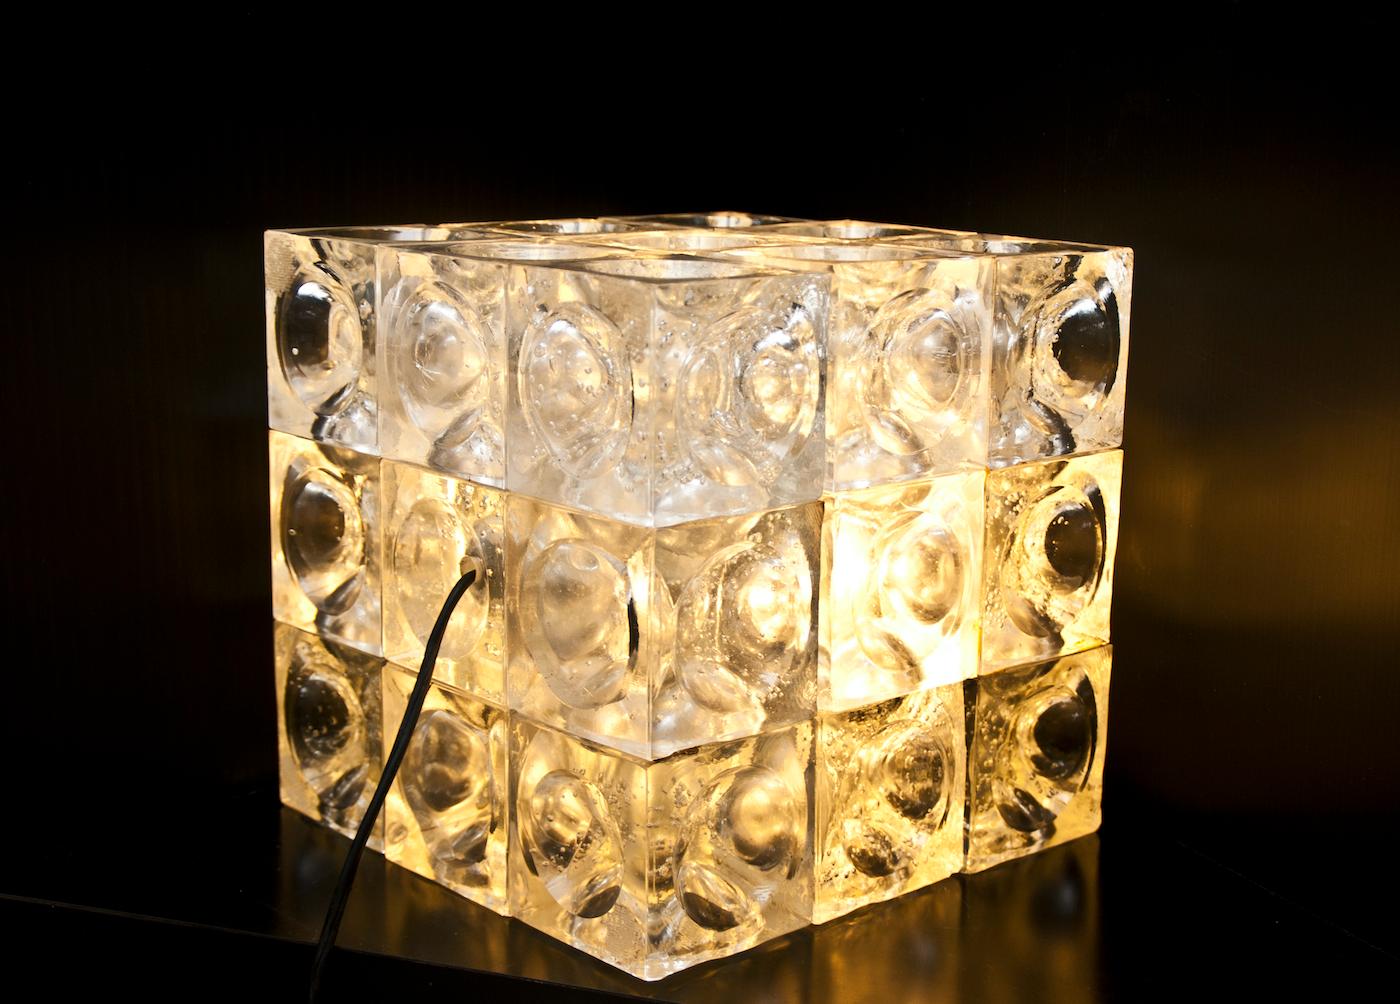 Sculptural Italian glass cube lamp designed by Poliarte.

Poliarte was one of the leading Italian lighting manufacturers during the 1960s and early 1970s.

At the beginning of the 1960s, Albano Poli created the Poliarte brand and reinvented